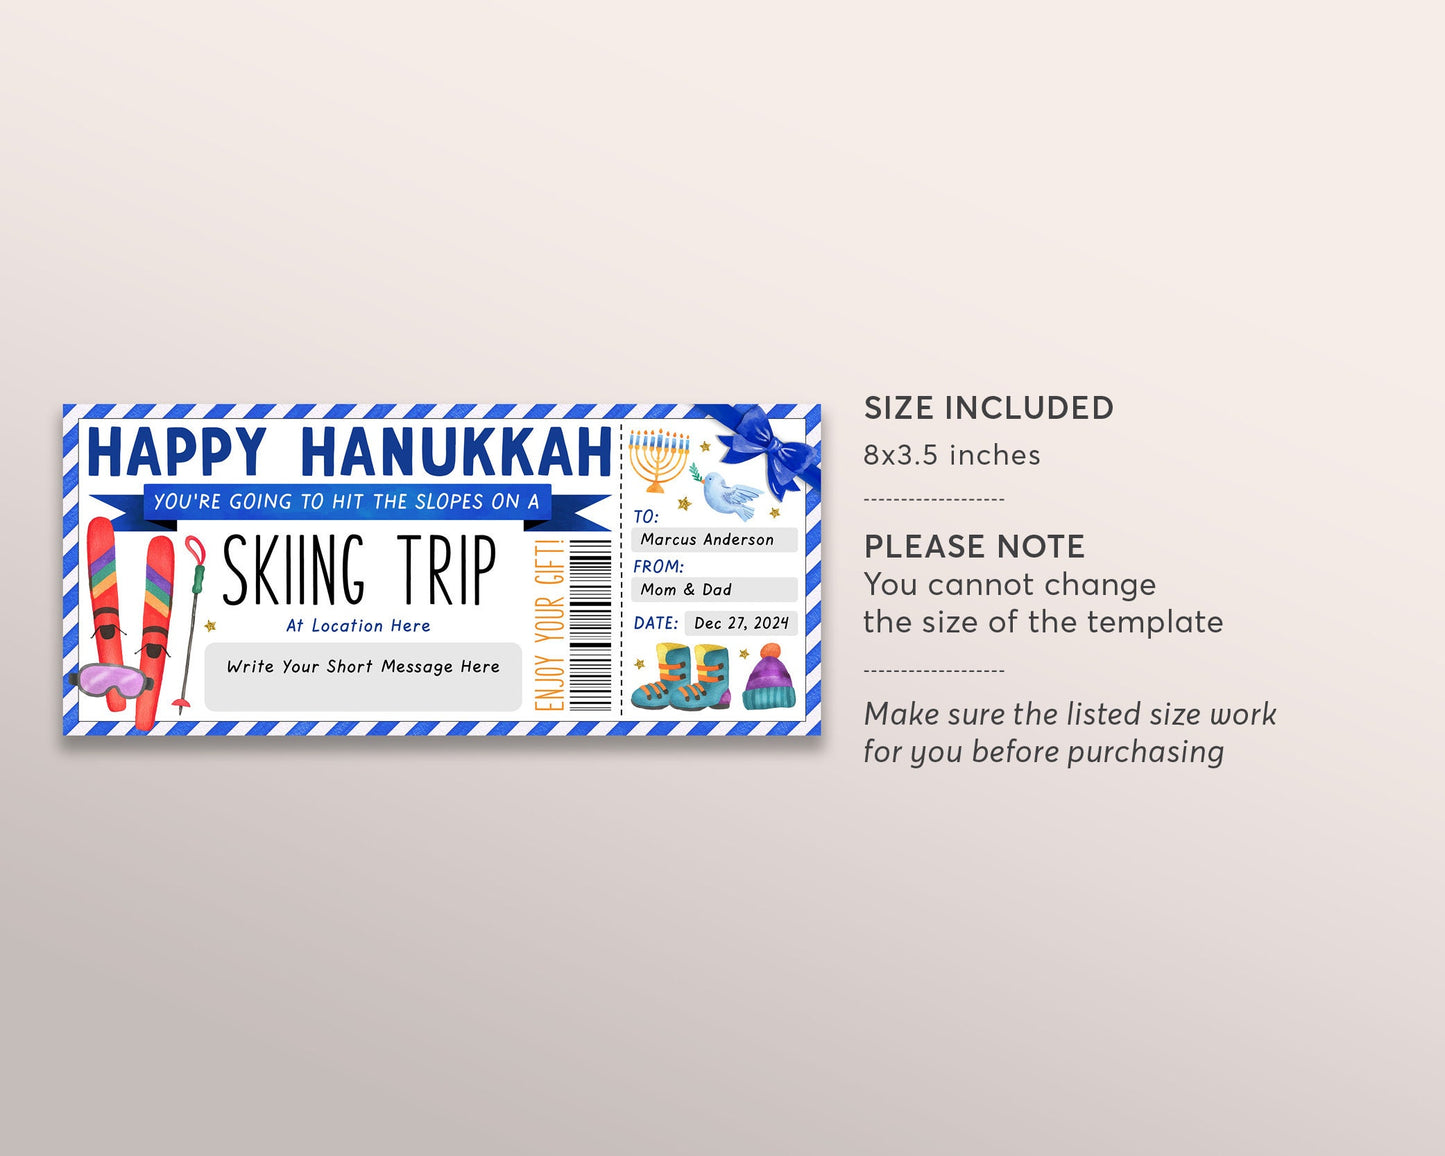 Happy Hanukkah Skiing Trip Gift Certificate Editable Template, Surprise Chanukah Holiday Ski Pass Vacation Gift Voucher, Skiing Lessons